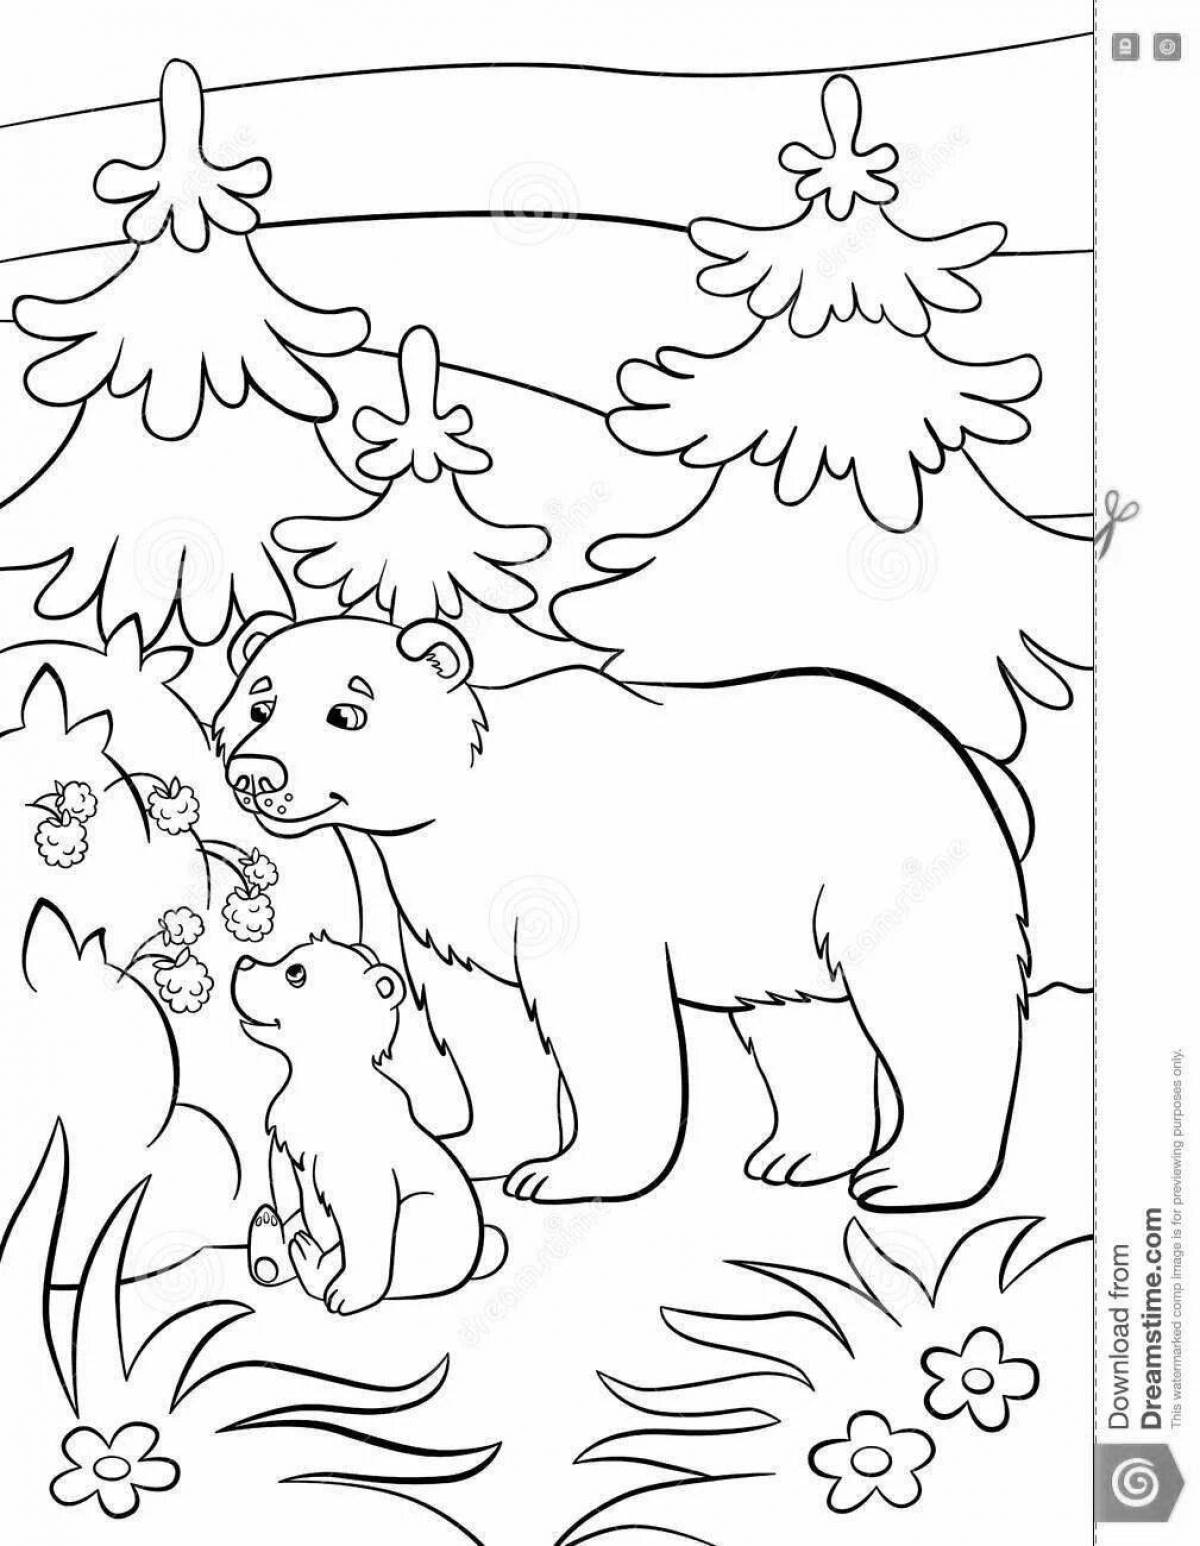 Coloring playful teddy bear with cubs